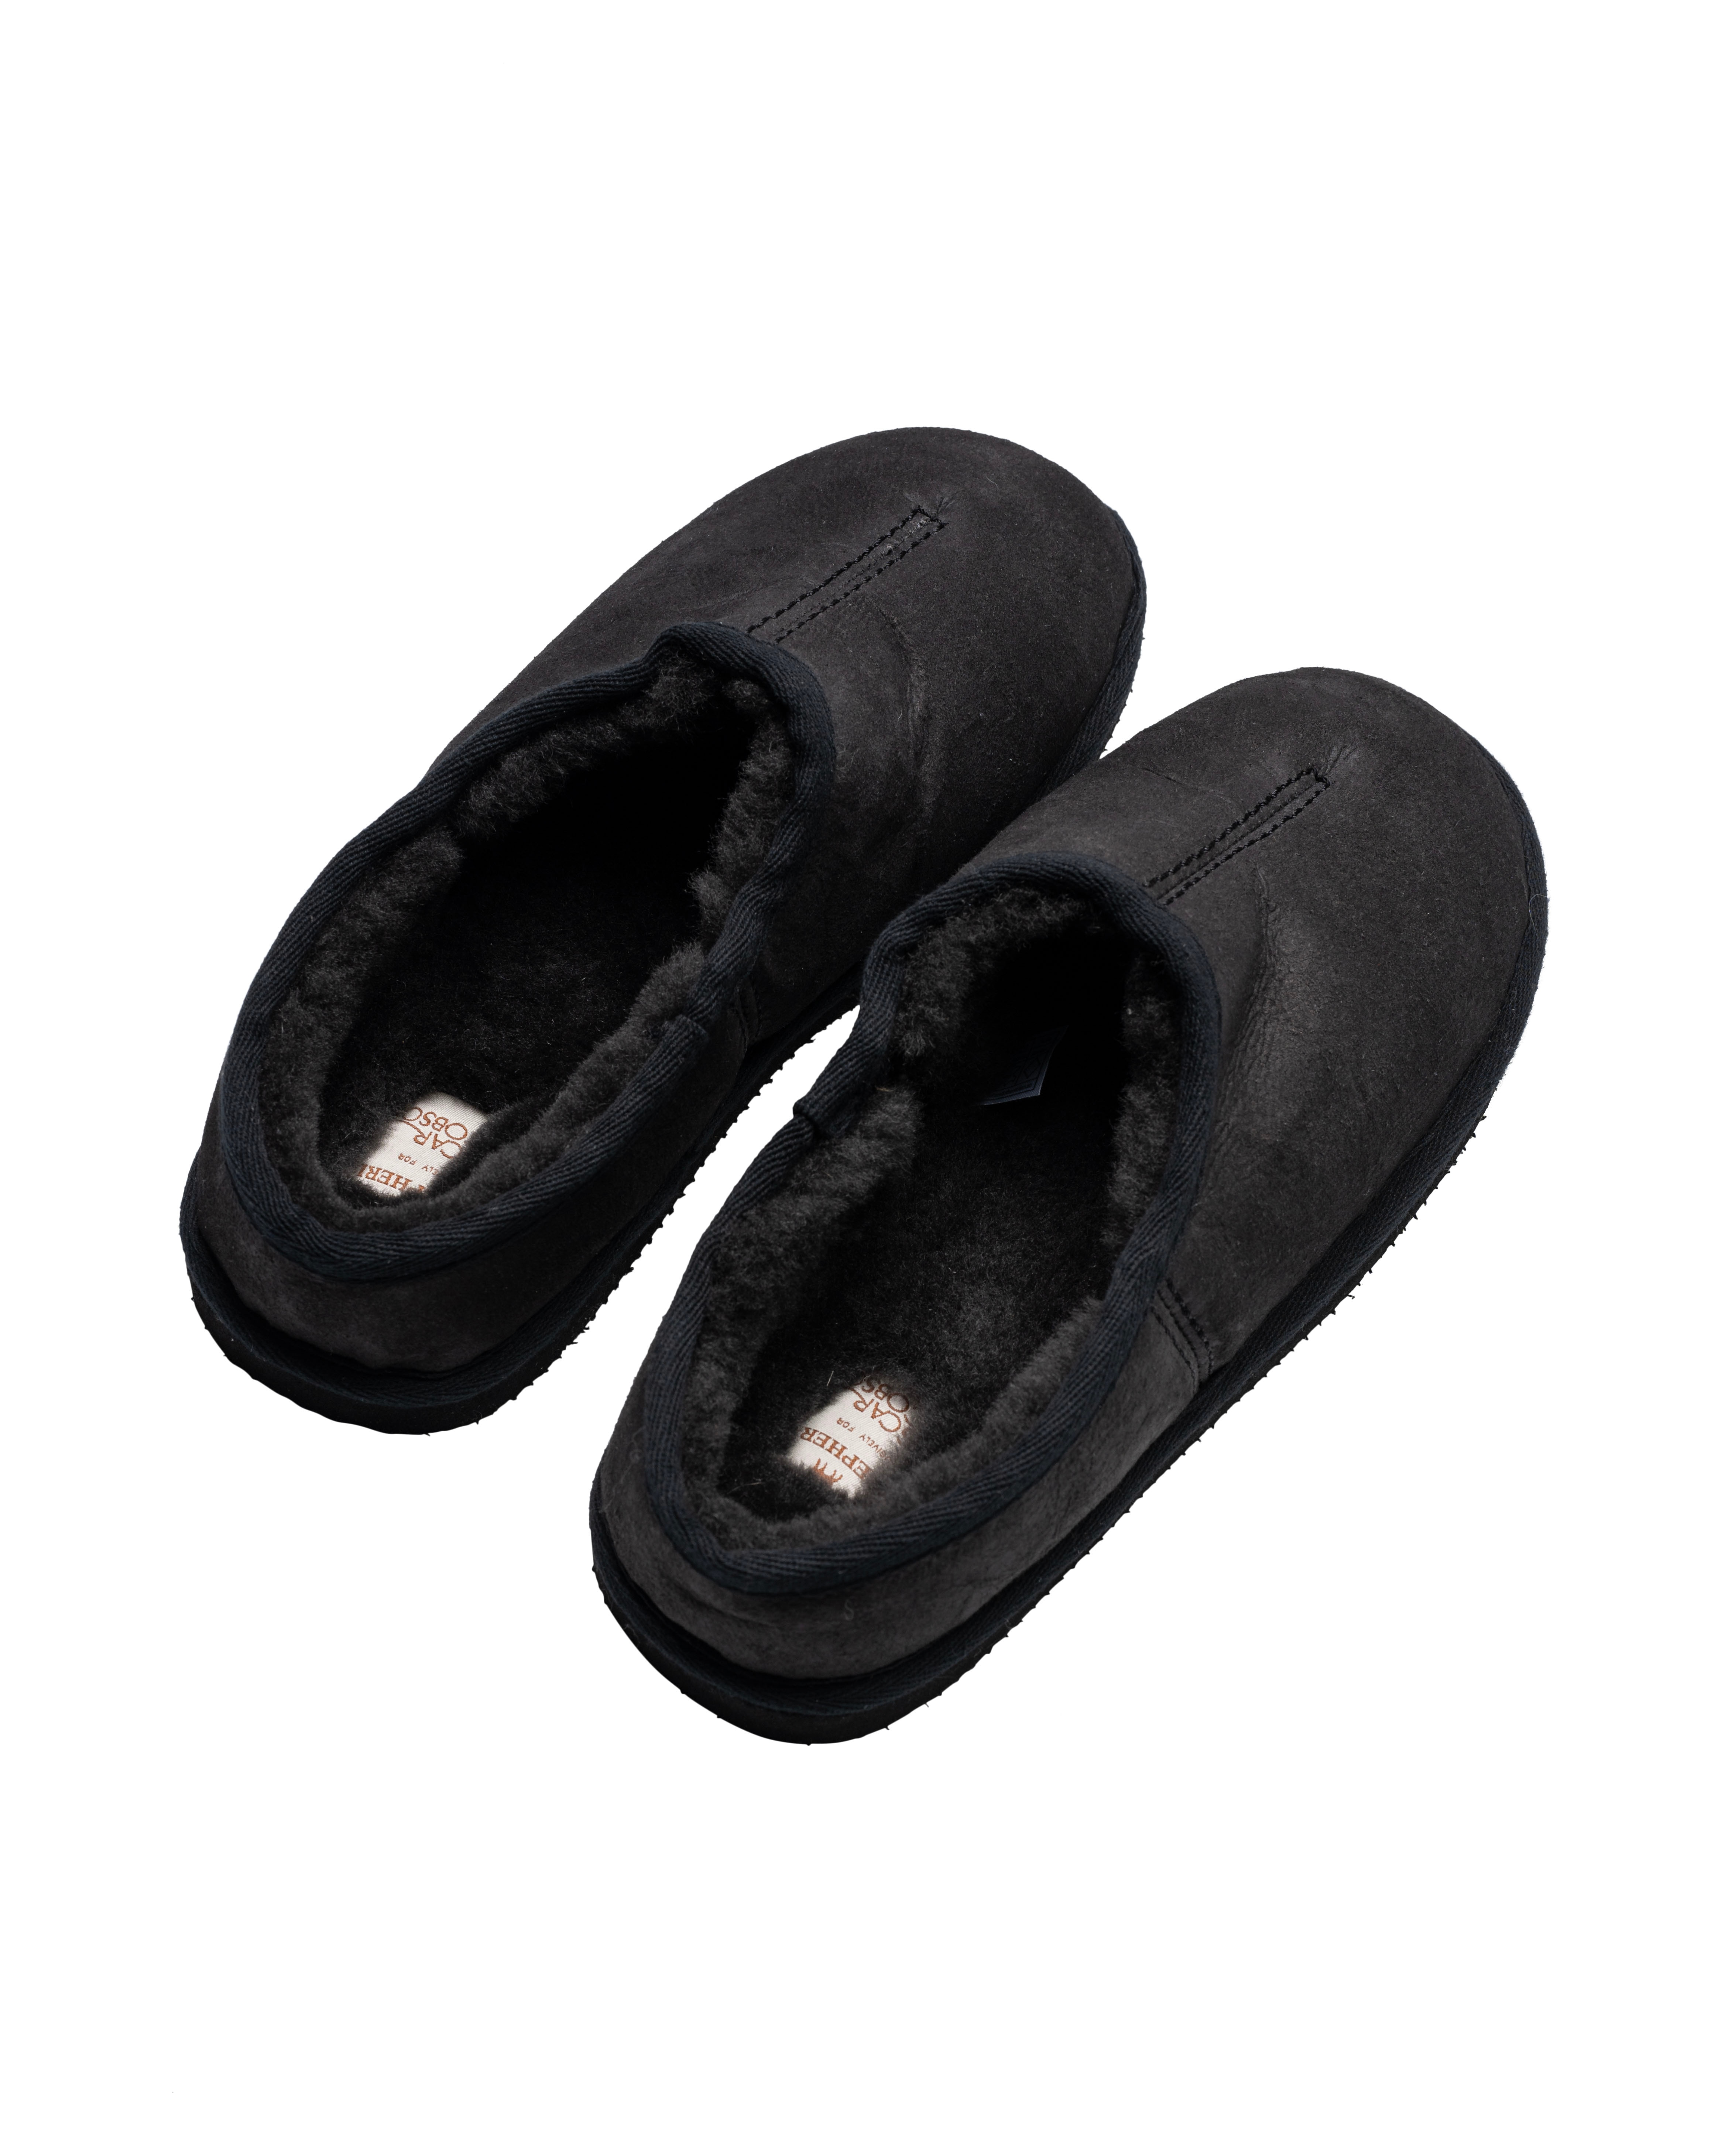 Frithiof slippers